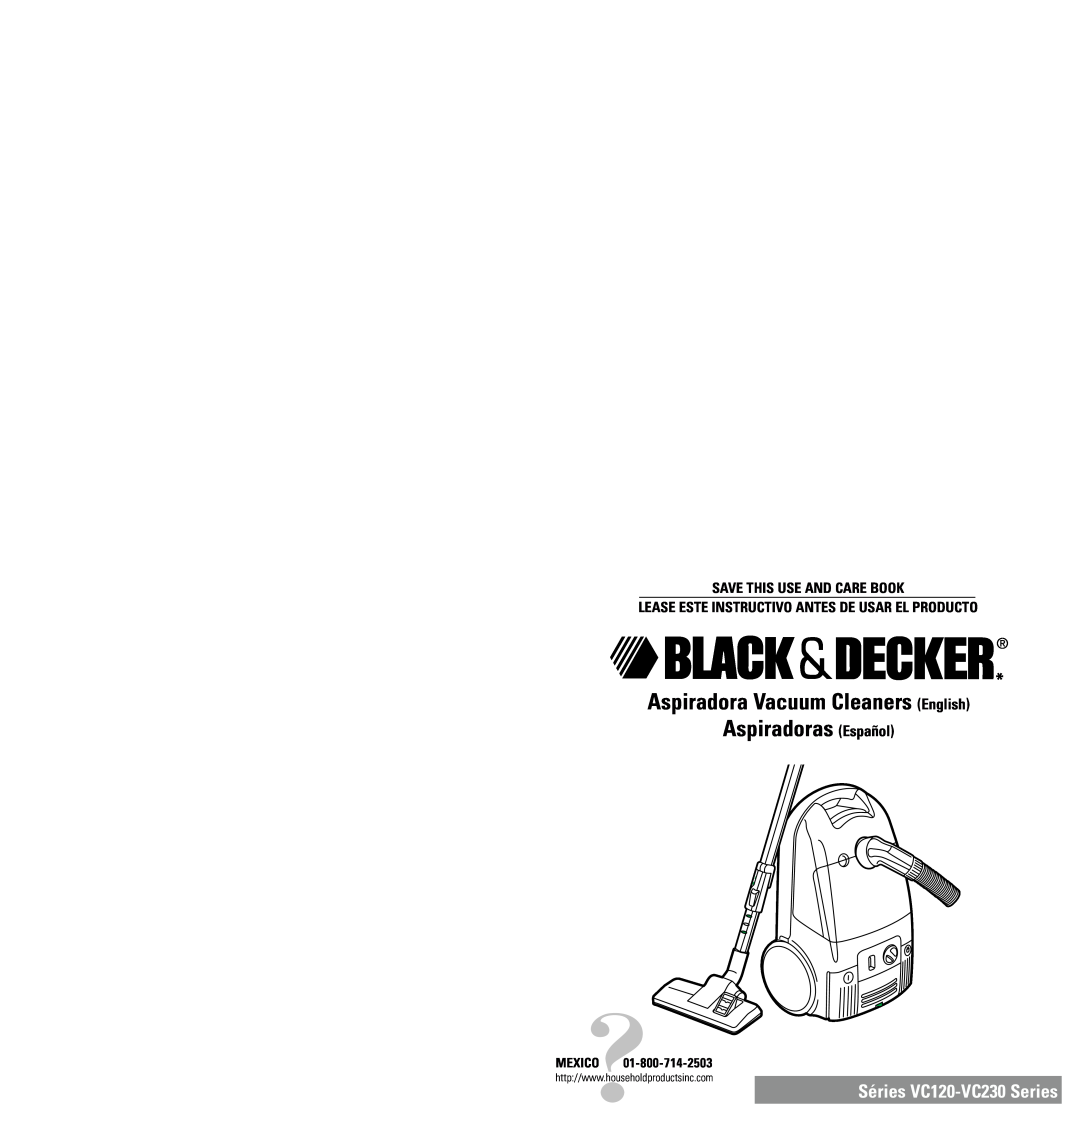 Black & Decker manual Séries VC120-VC230 Series, MEXICO?01-800-714-2503, Save This Use And Care Book 